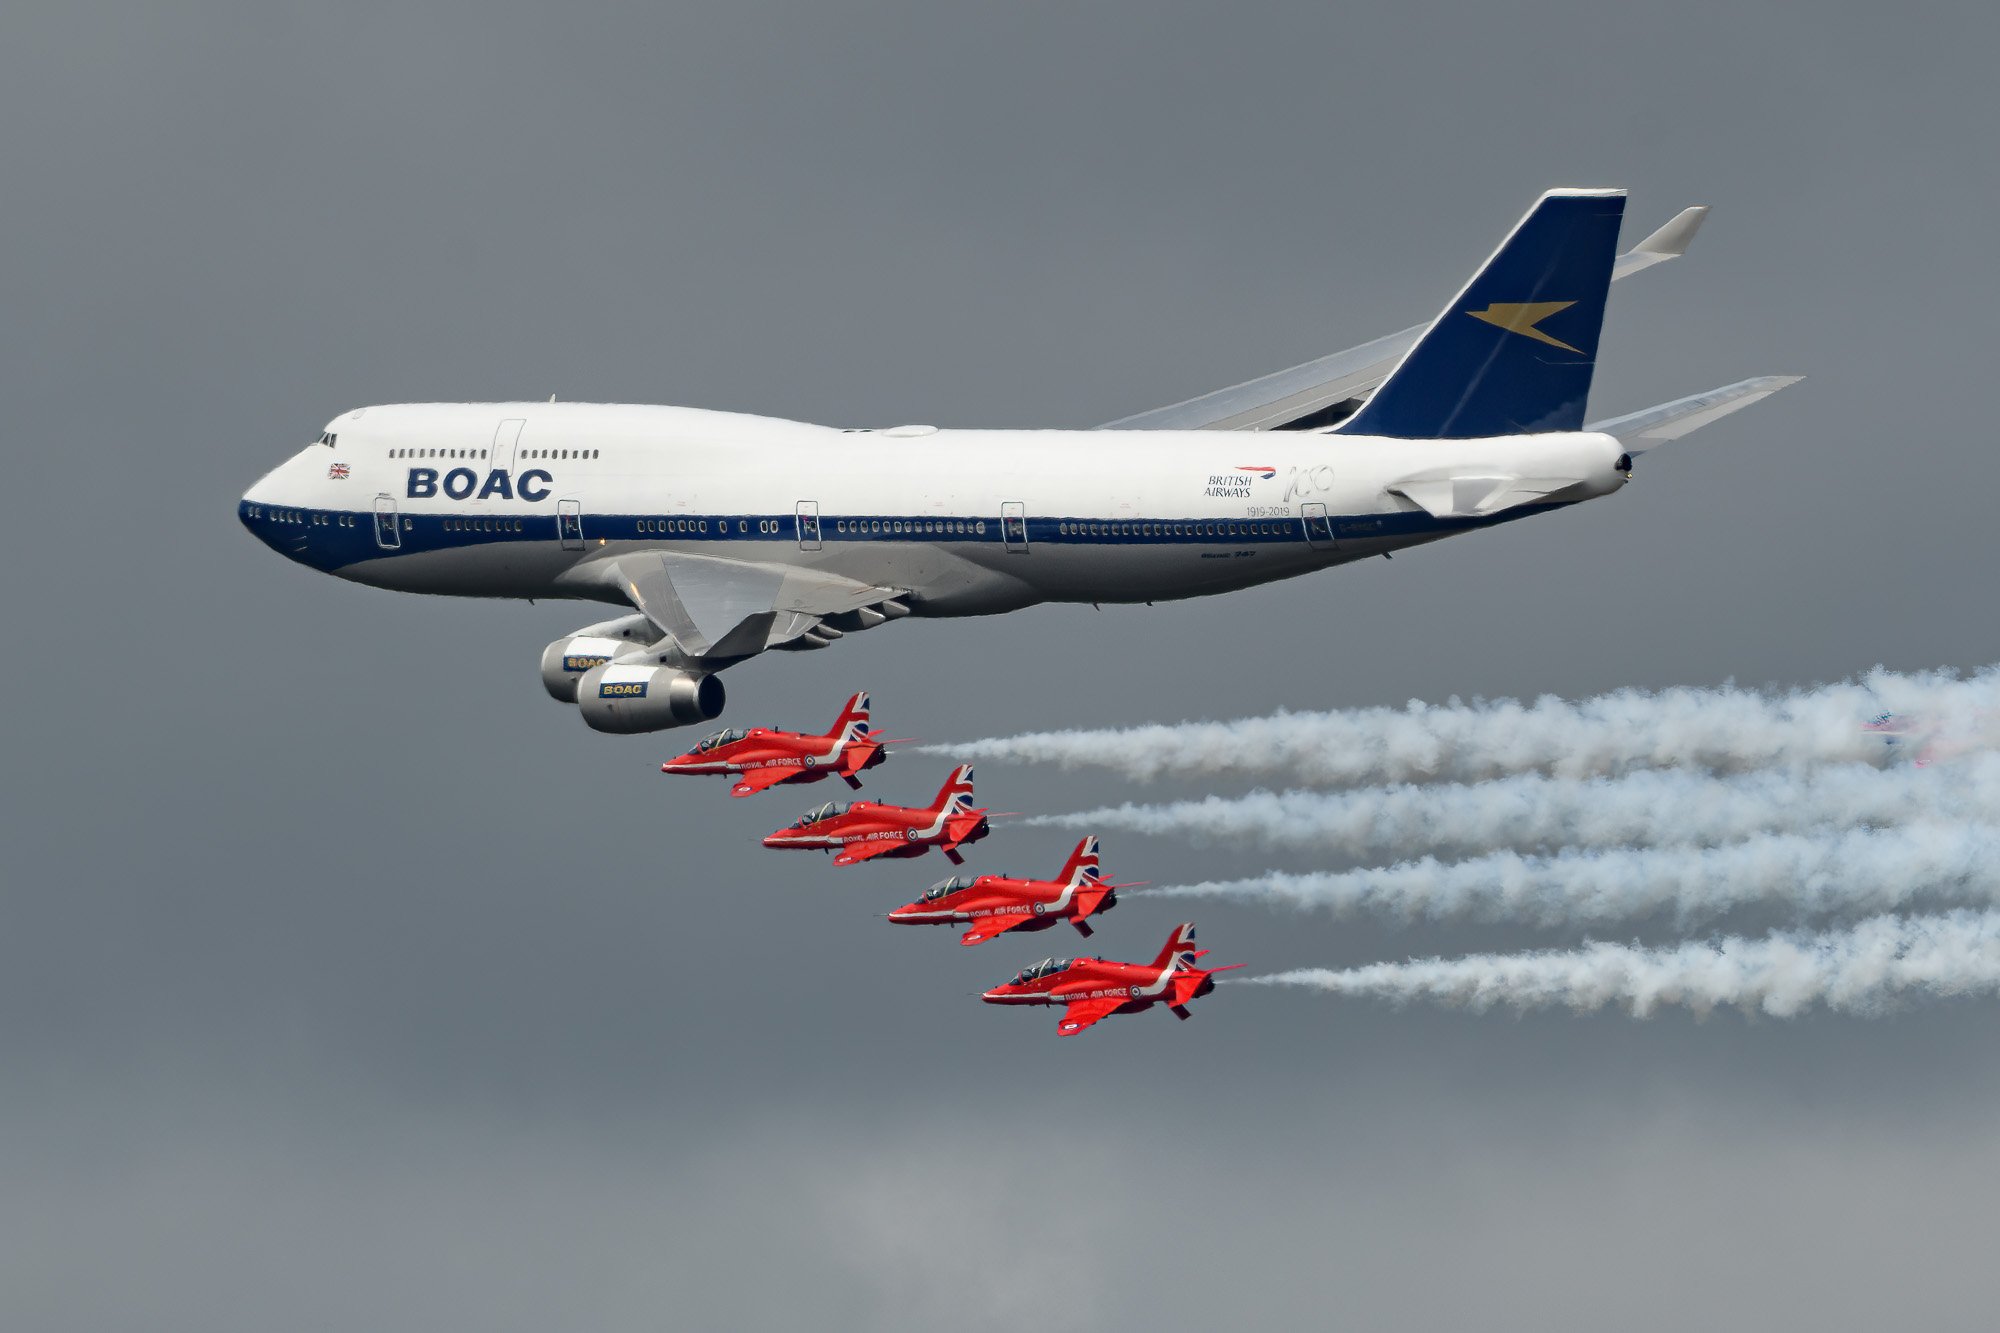 British Airways 747 "BOAC retrojet" in formation with the Red Arrows 